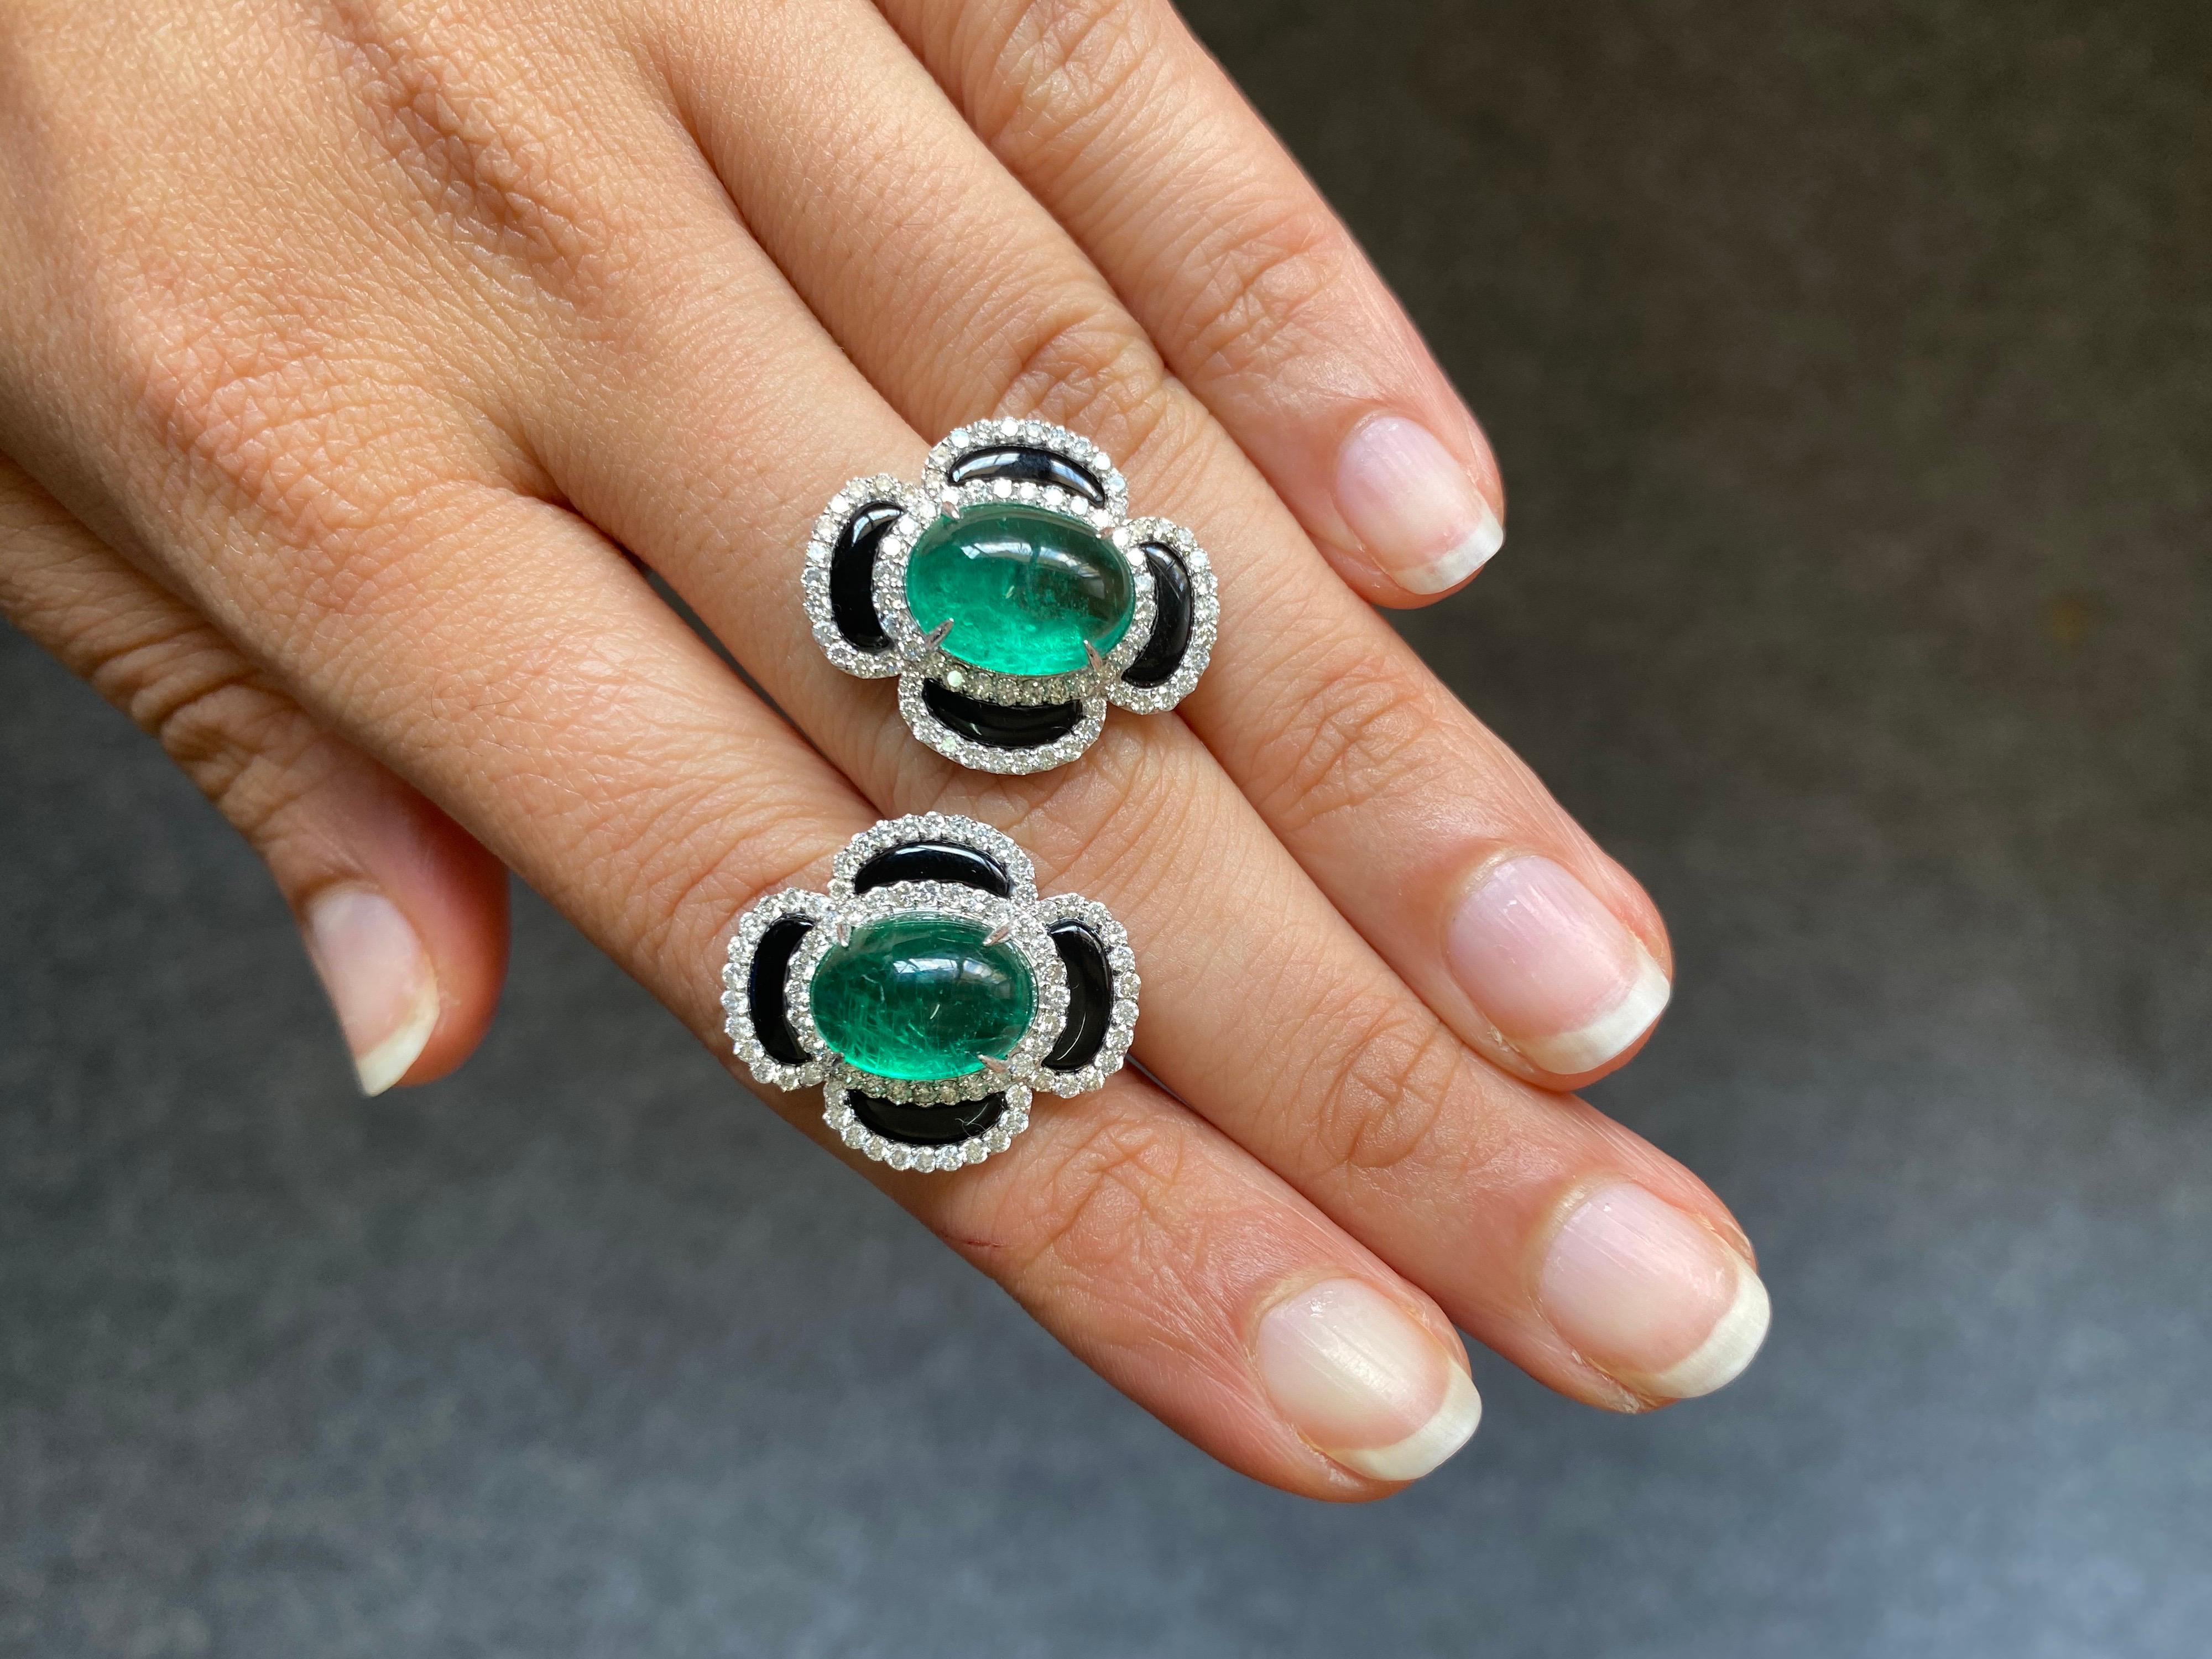 A pair of natural Zambian Emerald Cabochon (weighing 8.97 carats in total) stud Earrings, of very high quality and great luster and color. The stones are set in 7.5 grams of solid 18K White Gold and 1.7 carats White Diamonds. 
There is a matching